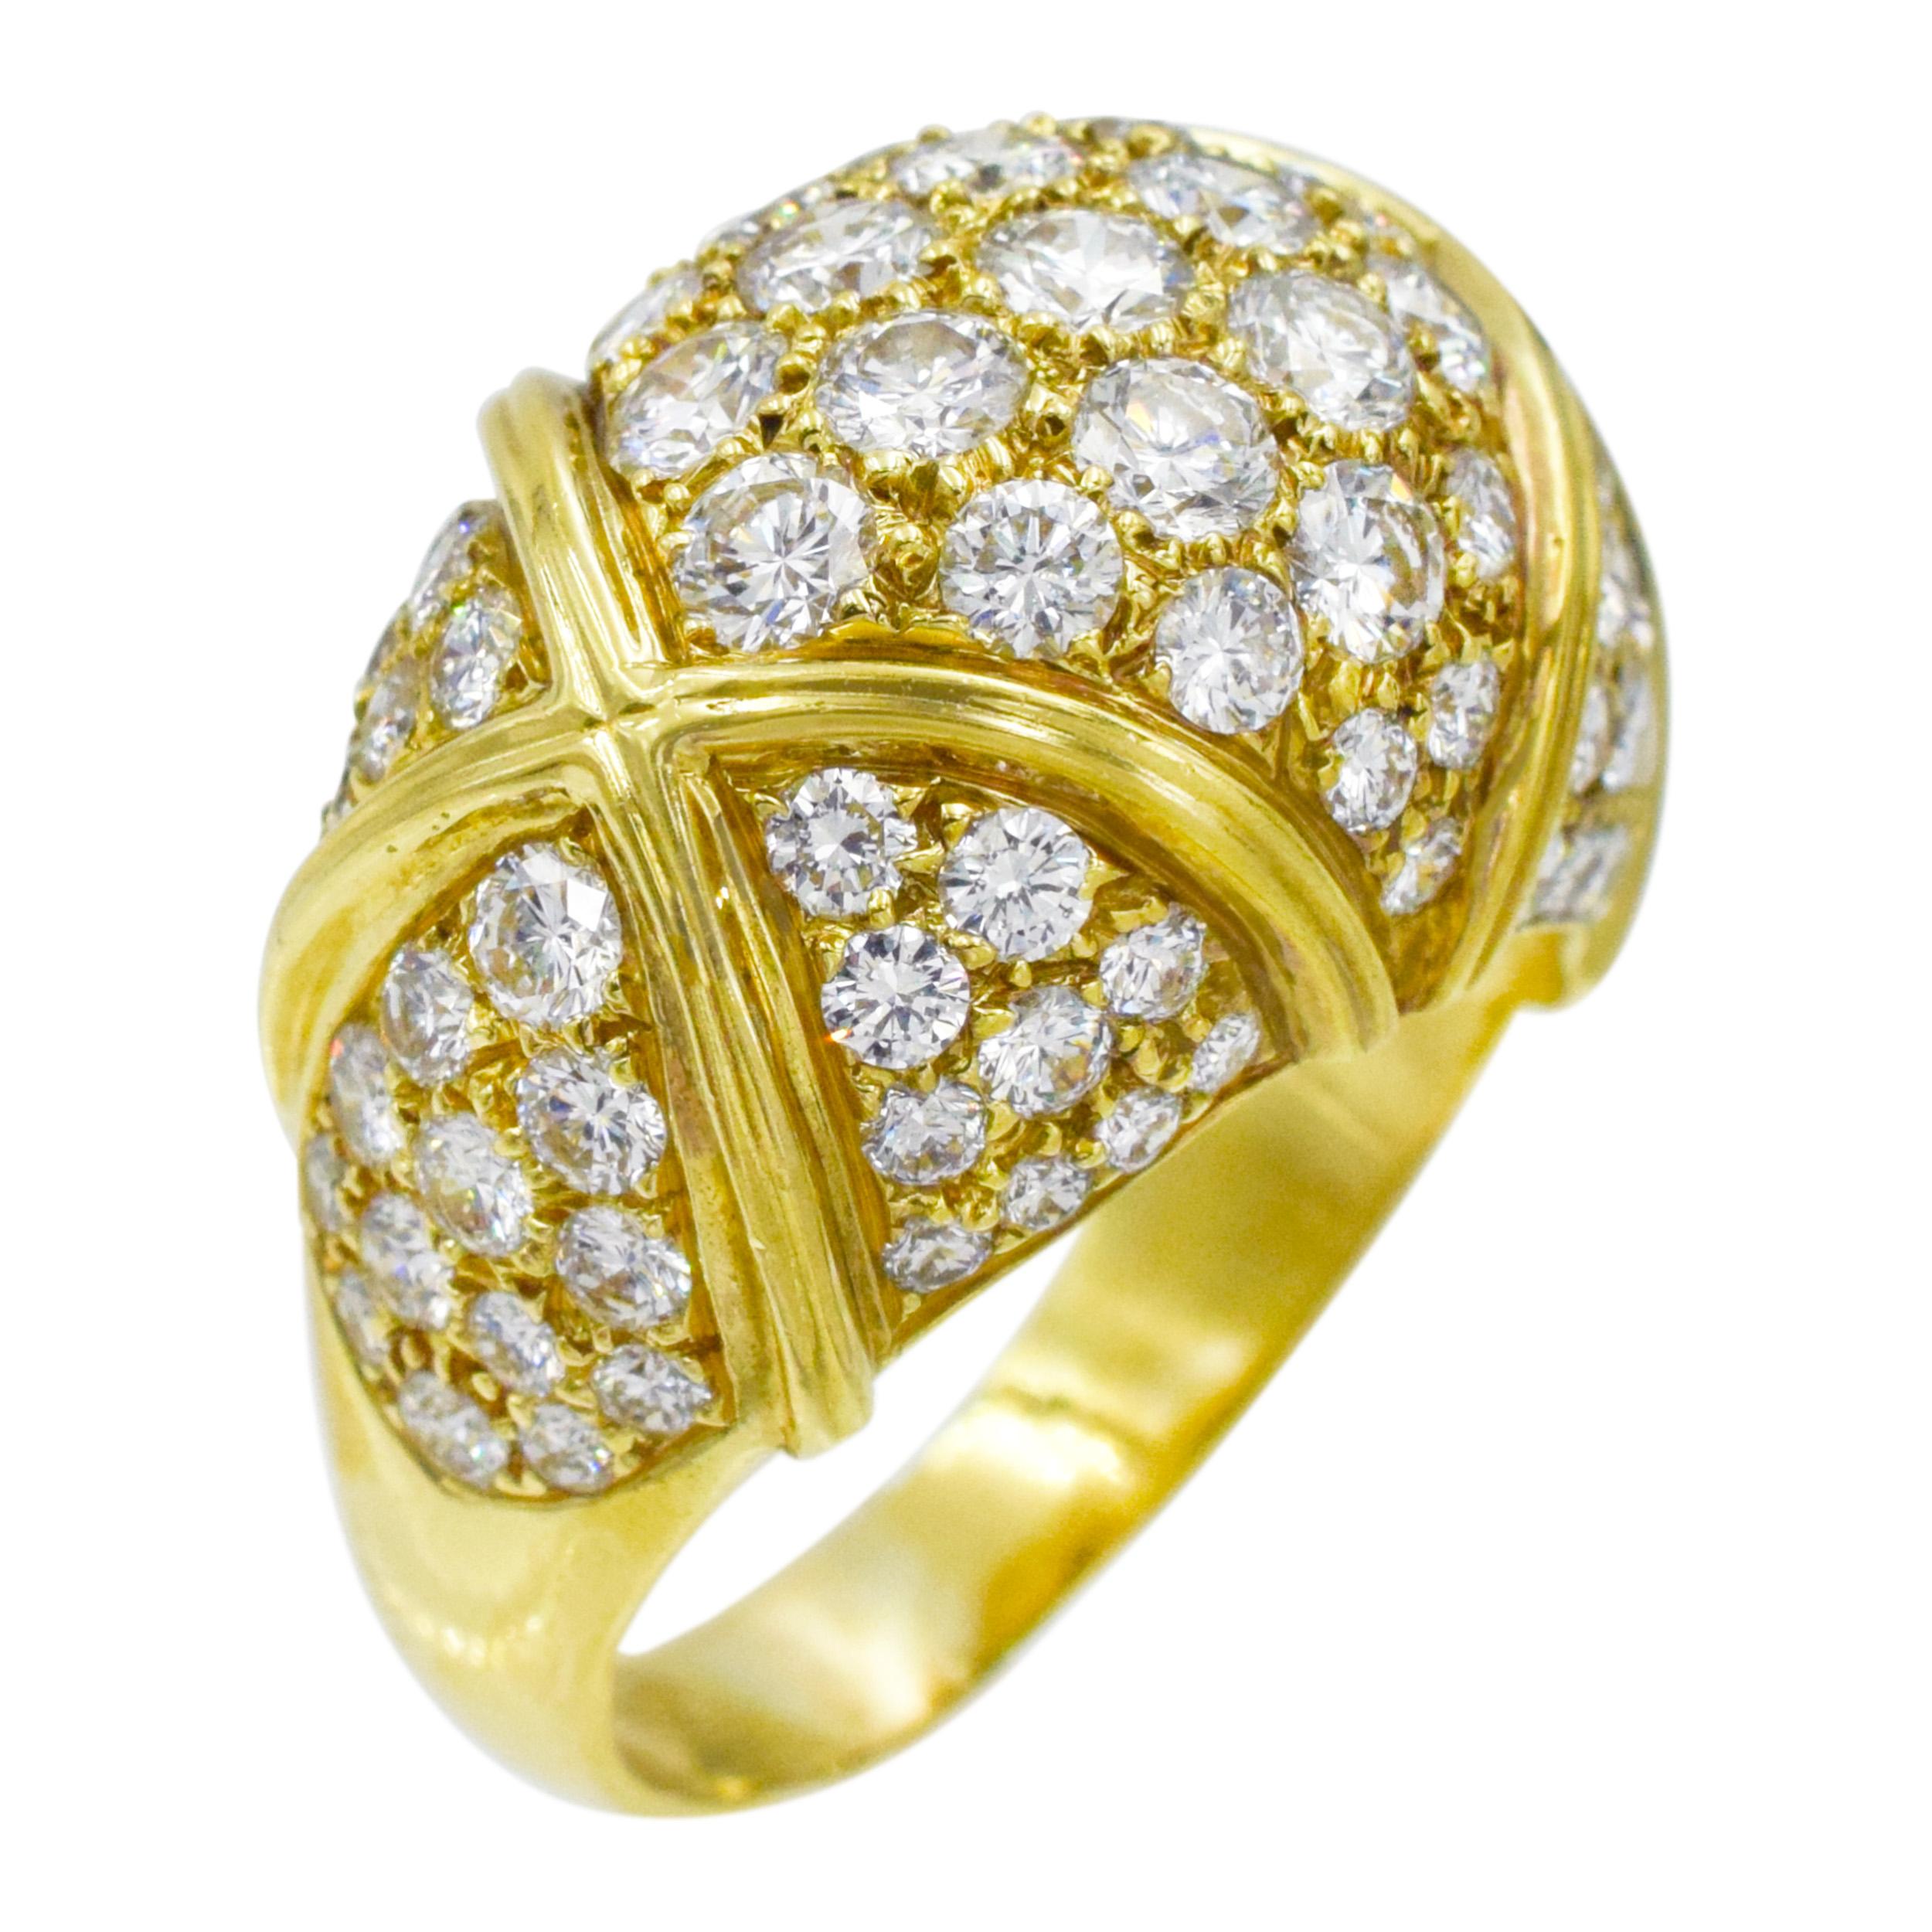 Van Cleef & Arpels Gold and Diamond Dome Ring For Sale 3